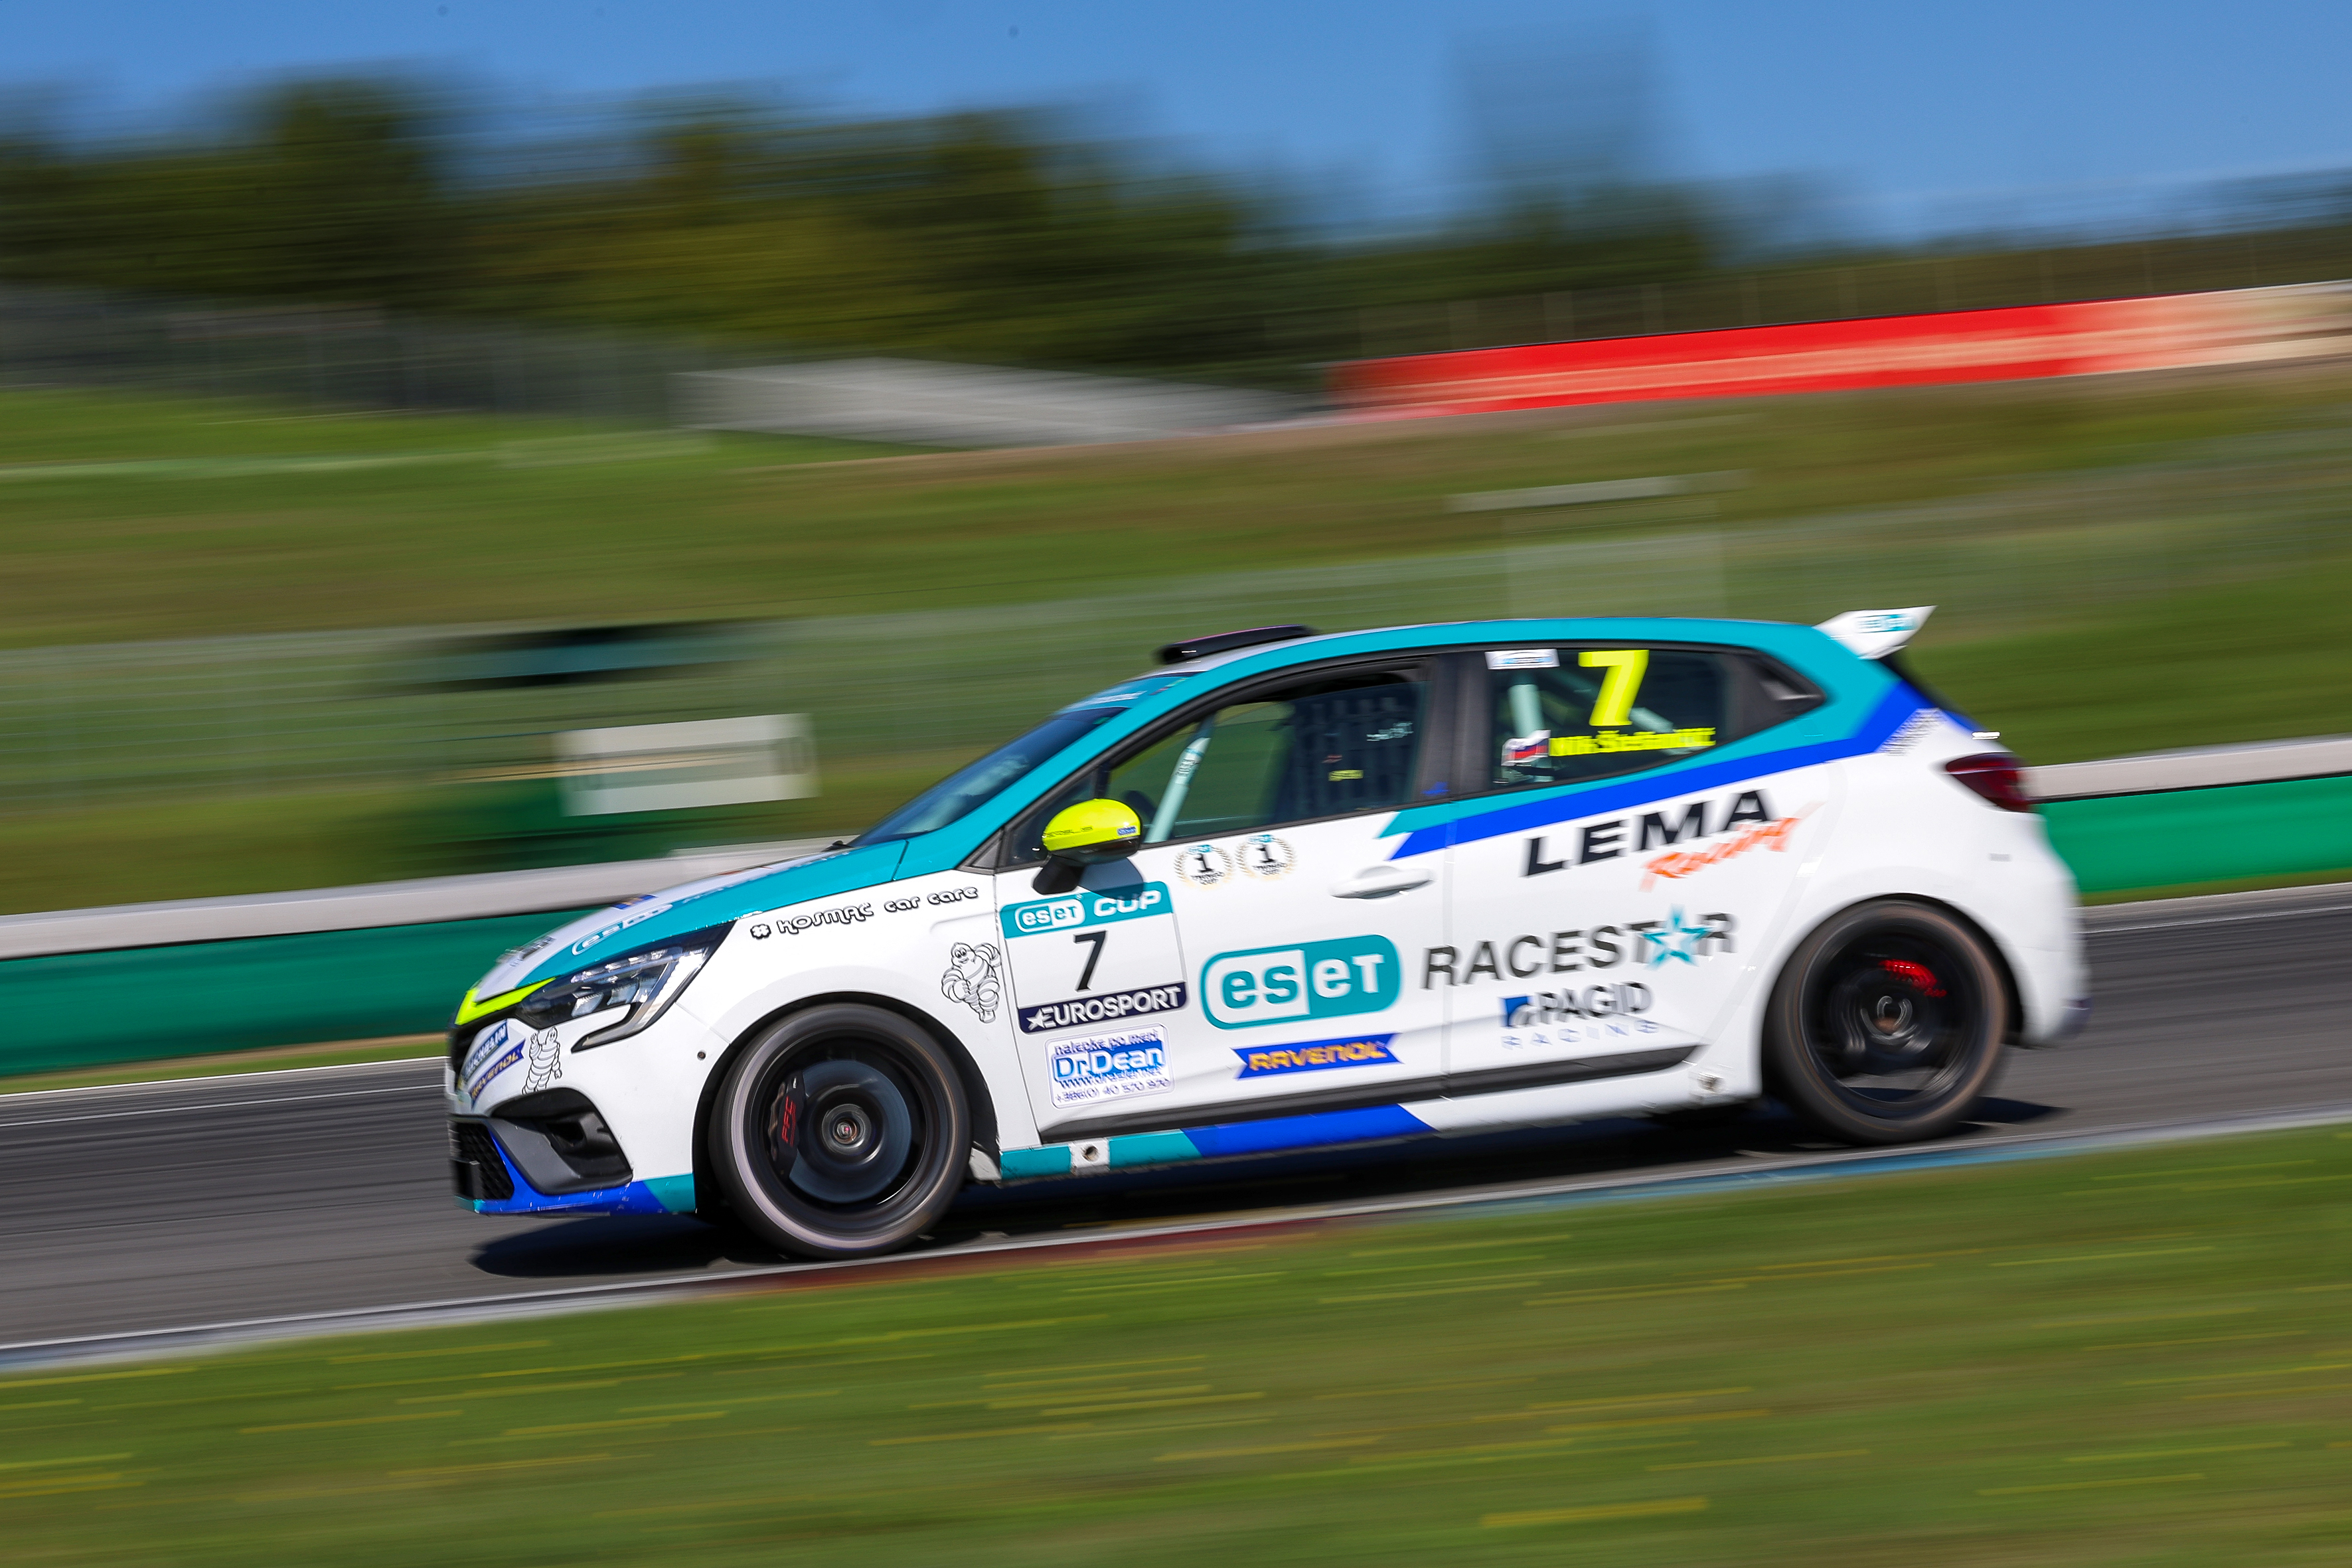 Clio Cup bids farewell to this year’s season in Brno, Lantos and Štefančič claim their first victories